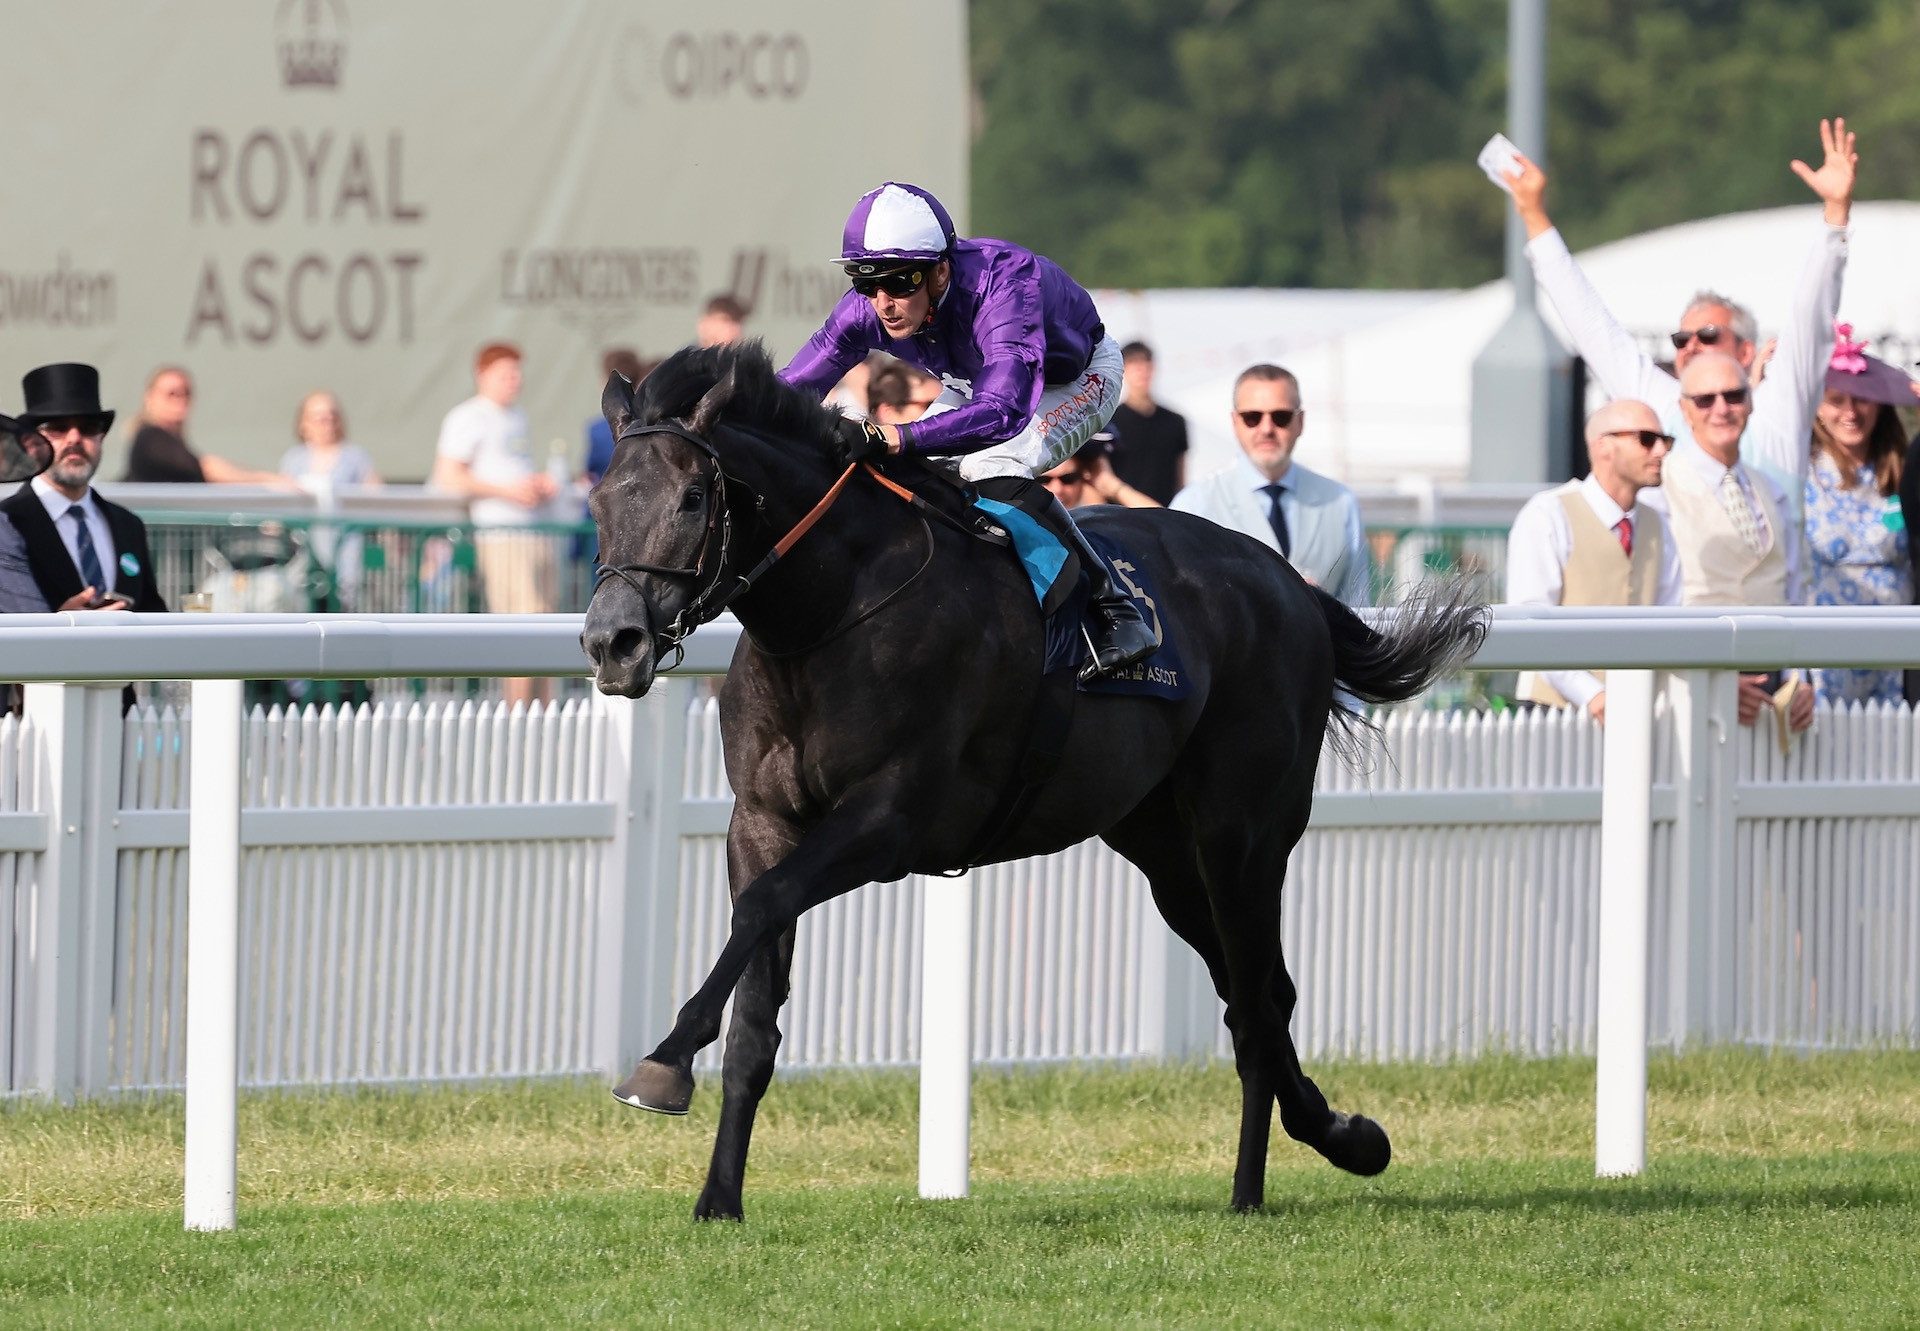 King Of Steel (Wootton Bassett) Wins The Group 2 King Edward VII Stakes at Royal Ascot